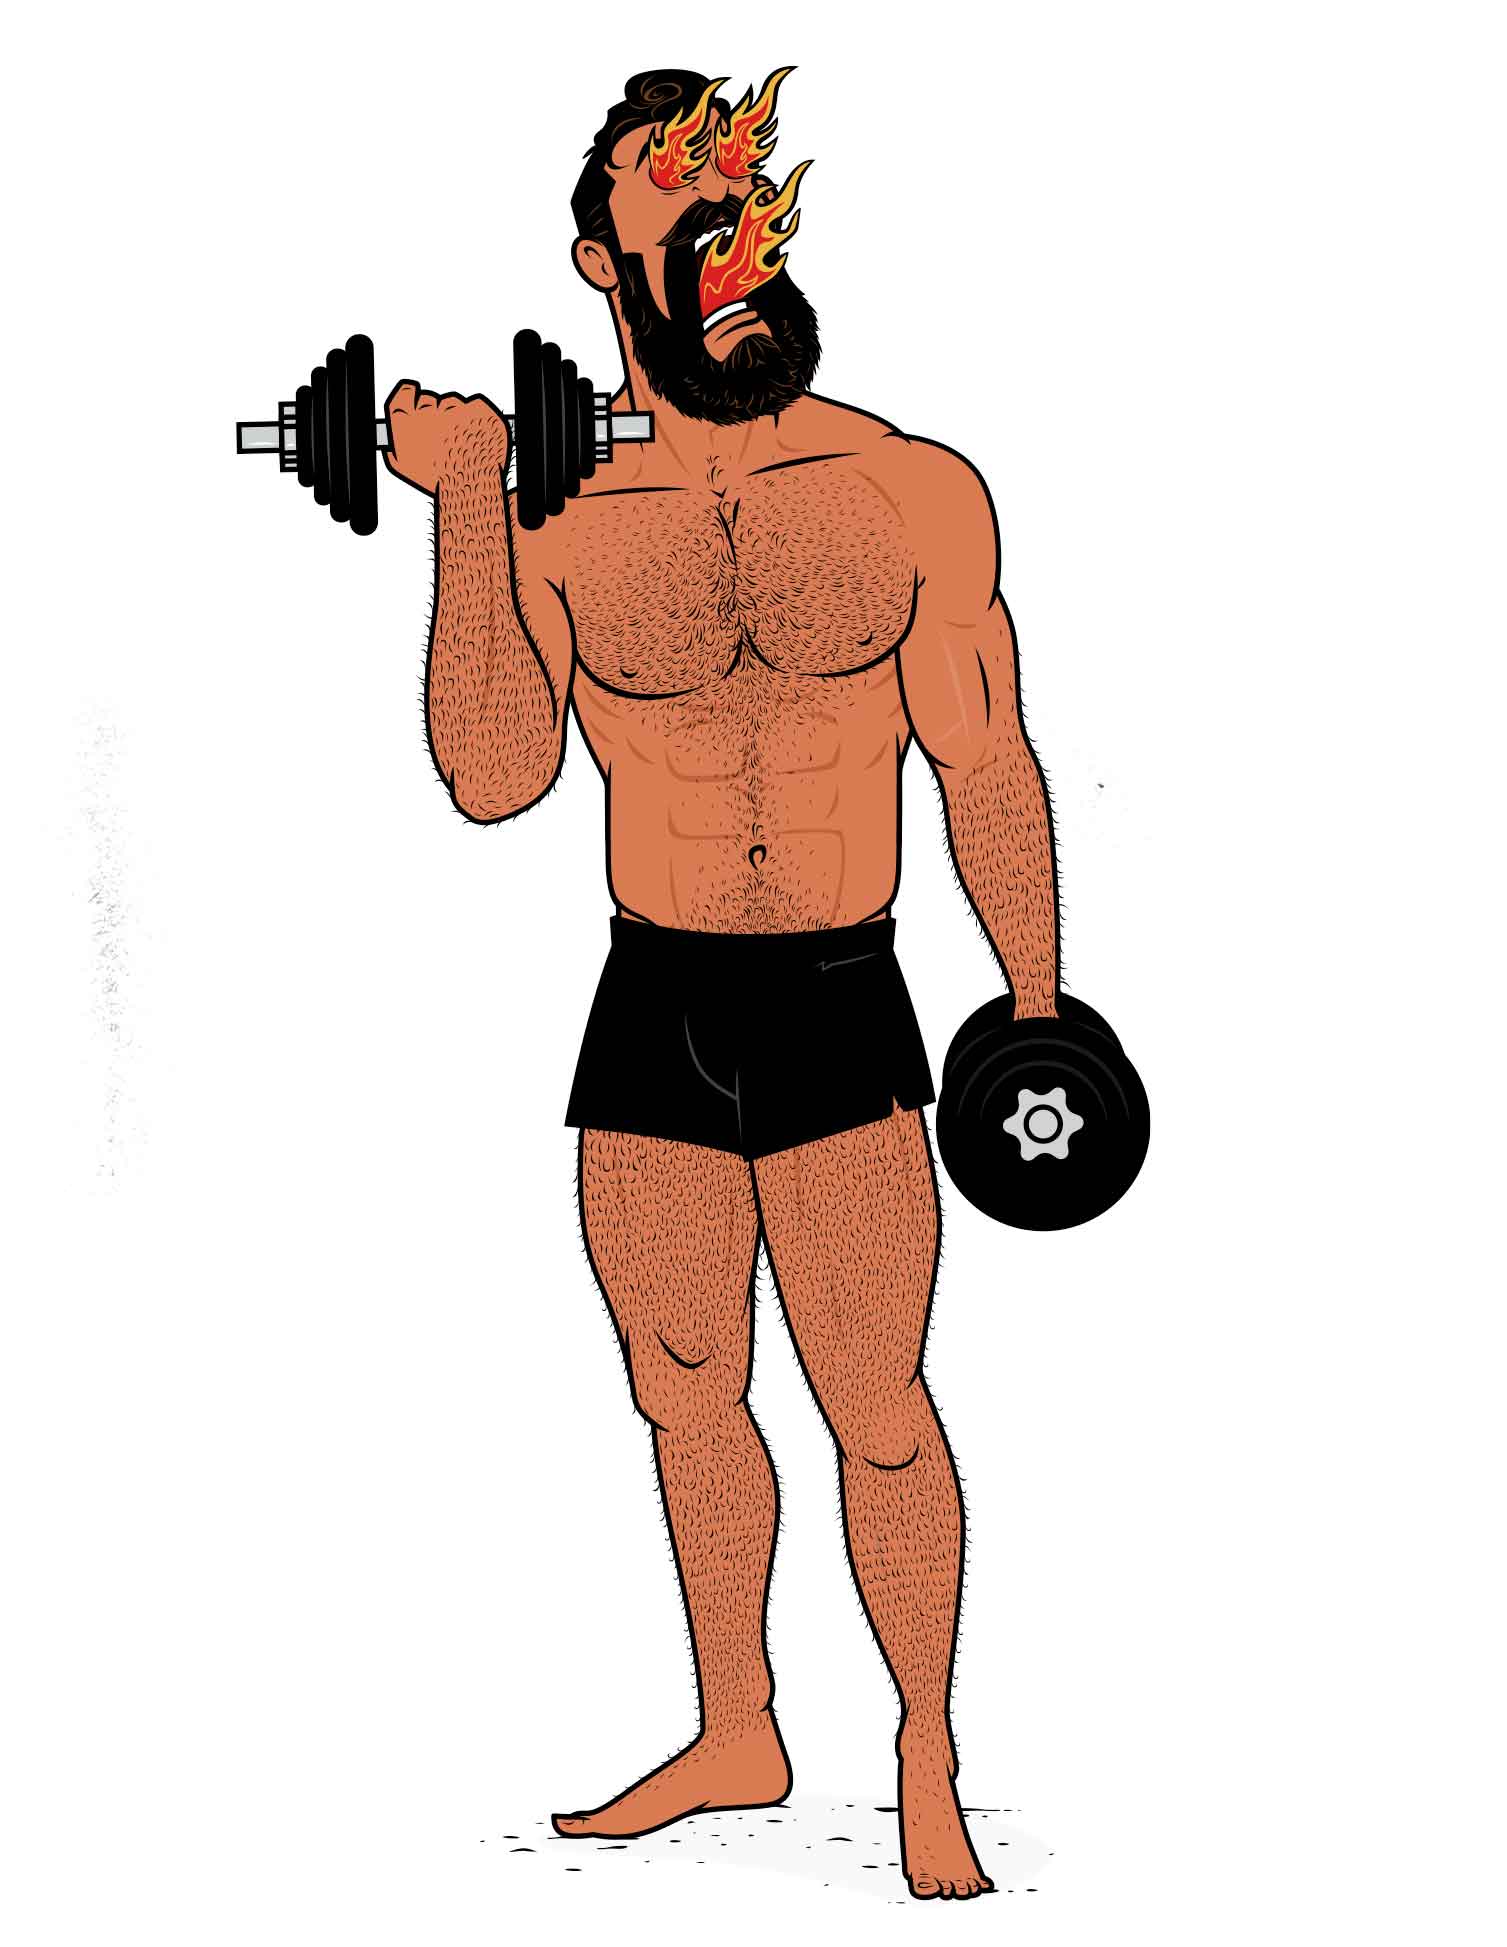 Outlift cartoon of a bodybuilder doing biceps curls to build muscle.